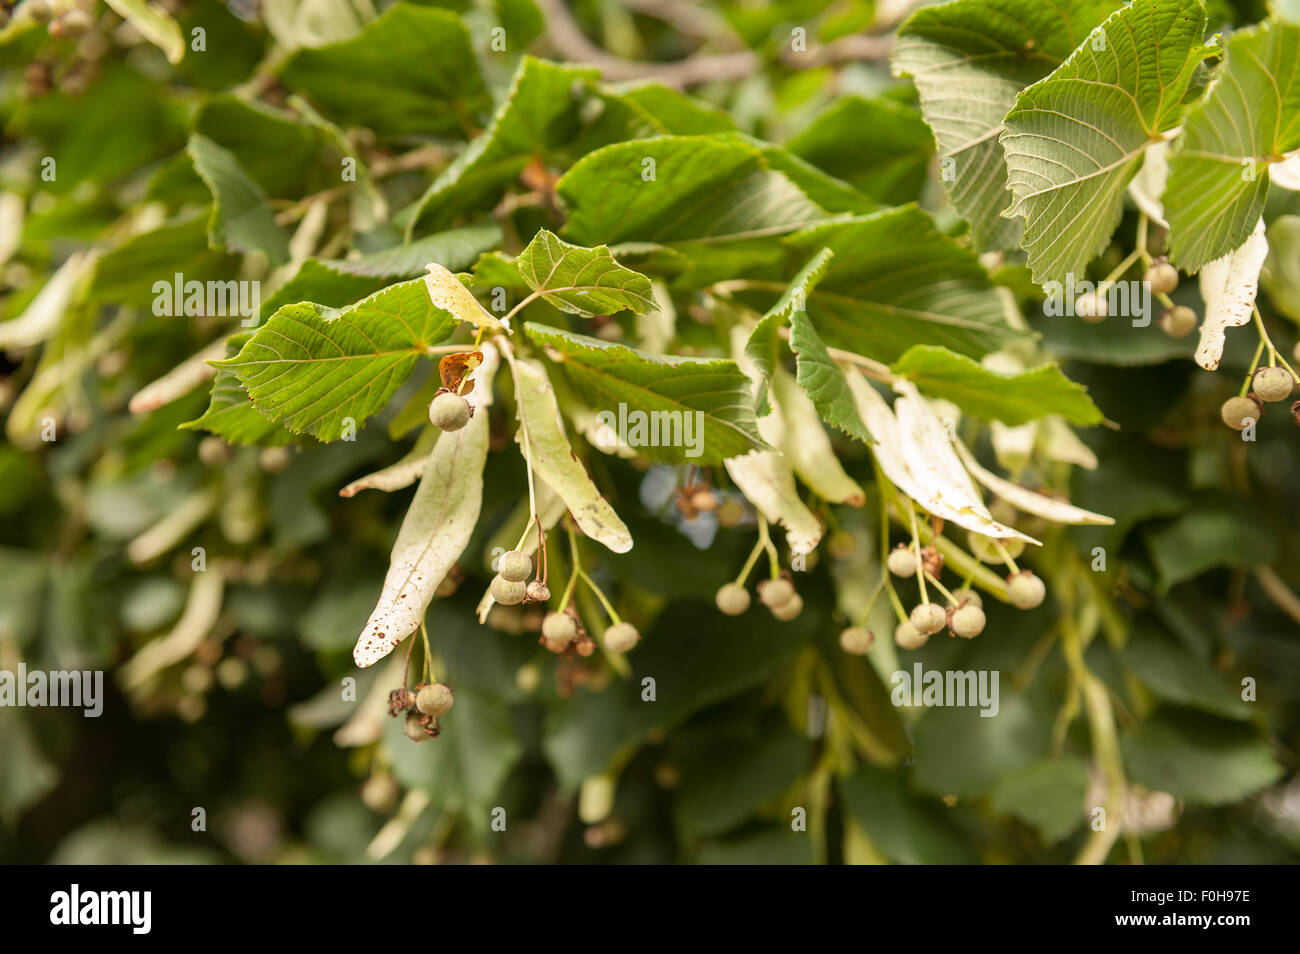 Developing seed cases of lime tree with single wing for wind dispersal best for strong gusty winds Stock Photo